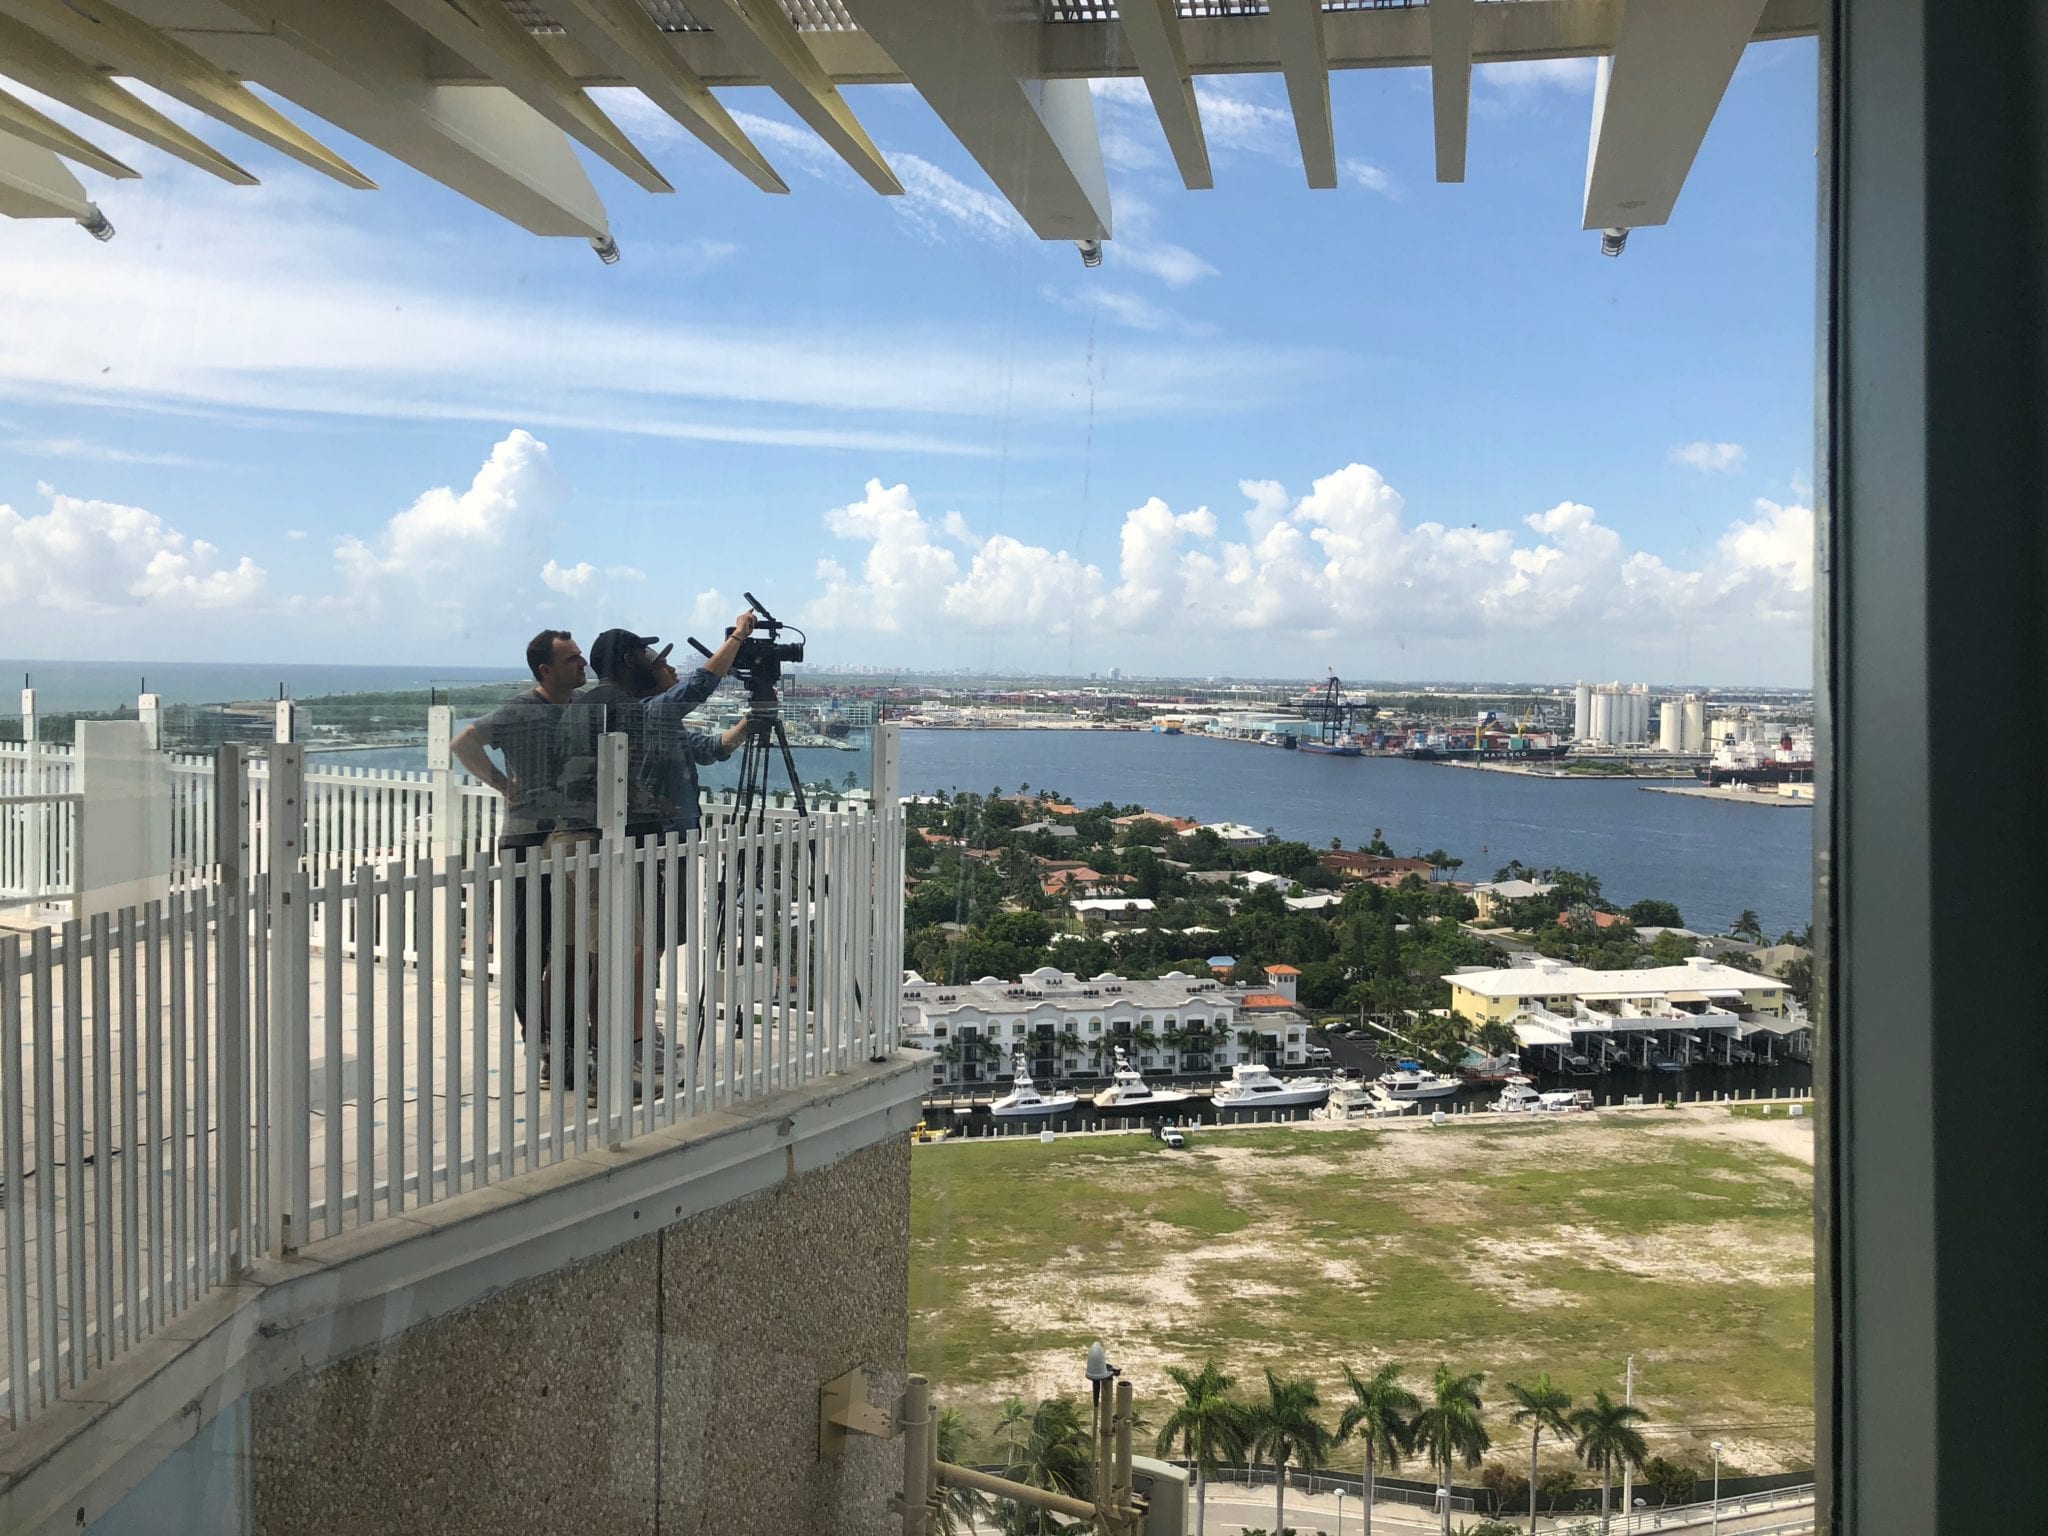 C&I Studios Go Pro Video cameraman setting up equipment on a platform overlooking the city and yacht club